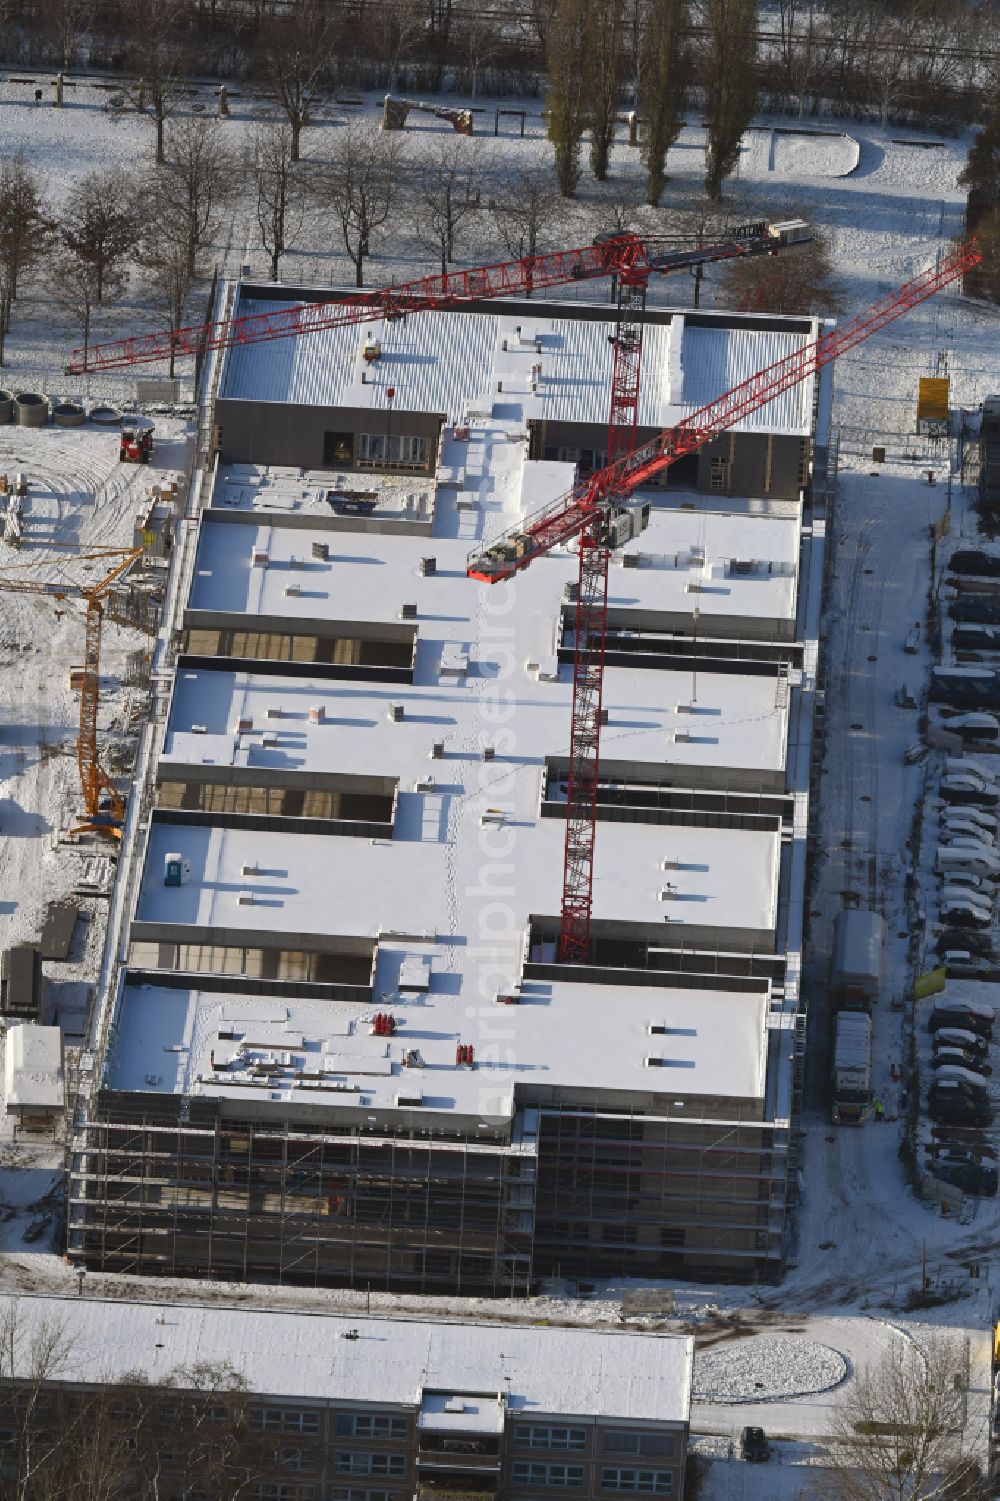 Aerial image Berlin - Wintry snowy new construction site of the school building Gymnasium with Sporthalle on street Erich-Kaestner-Strasse - Peter-Huchel-Strasse in the district Hellersdorf in Berlin, Germany